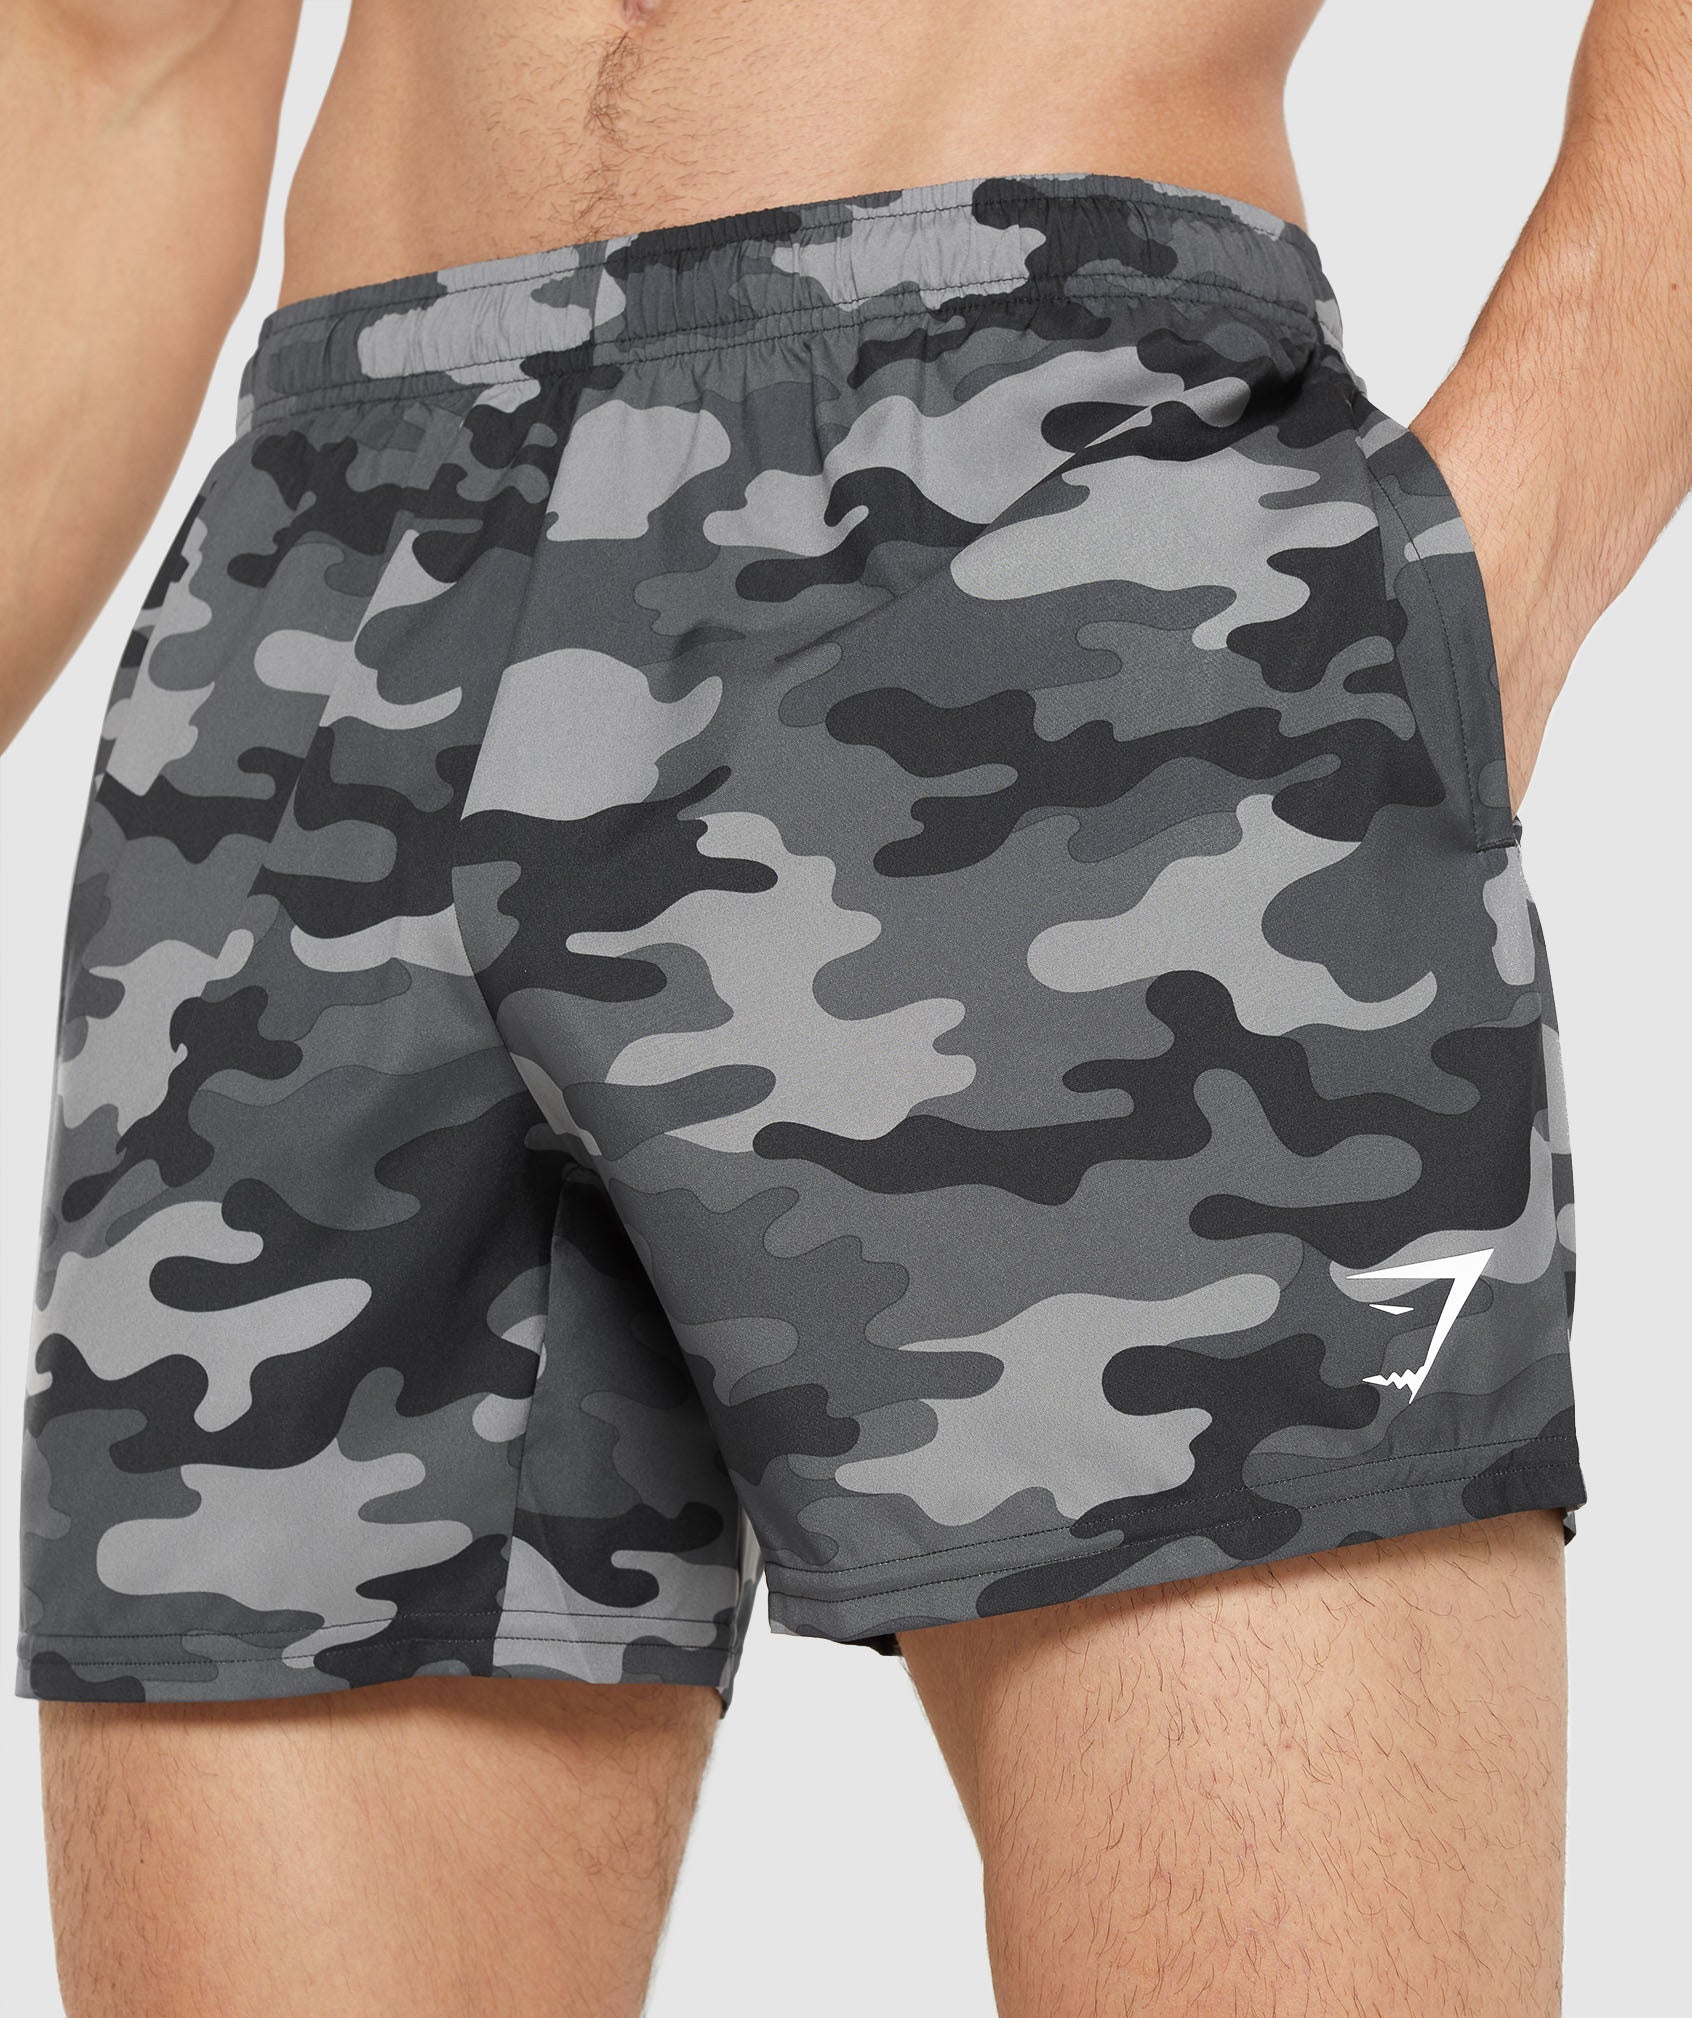 Arrival 5" Shorts in Grey Print